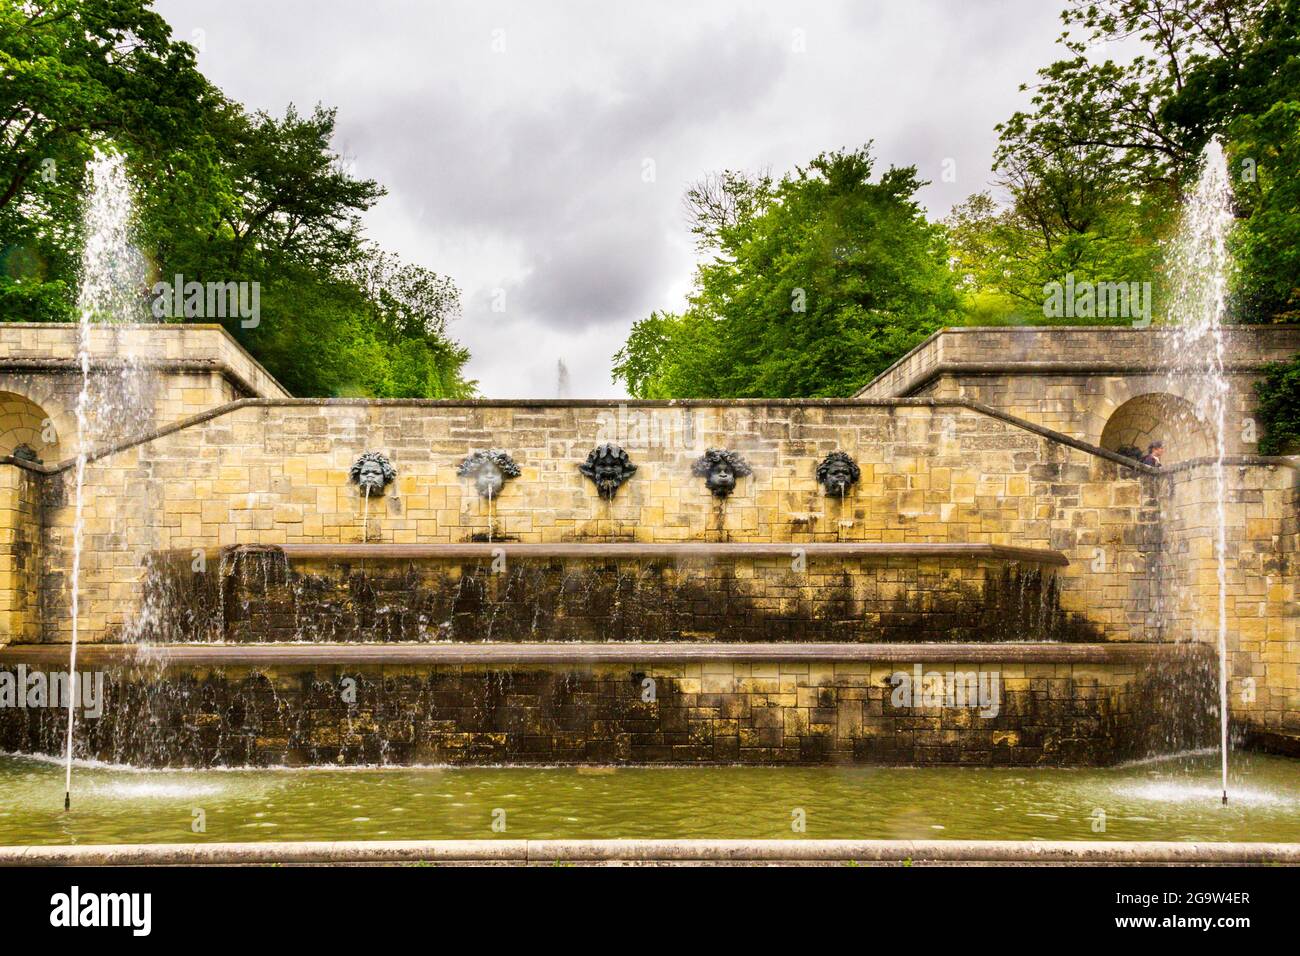 Fountains and water ways in the historic gardens at Sceaux, France Stock Photo